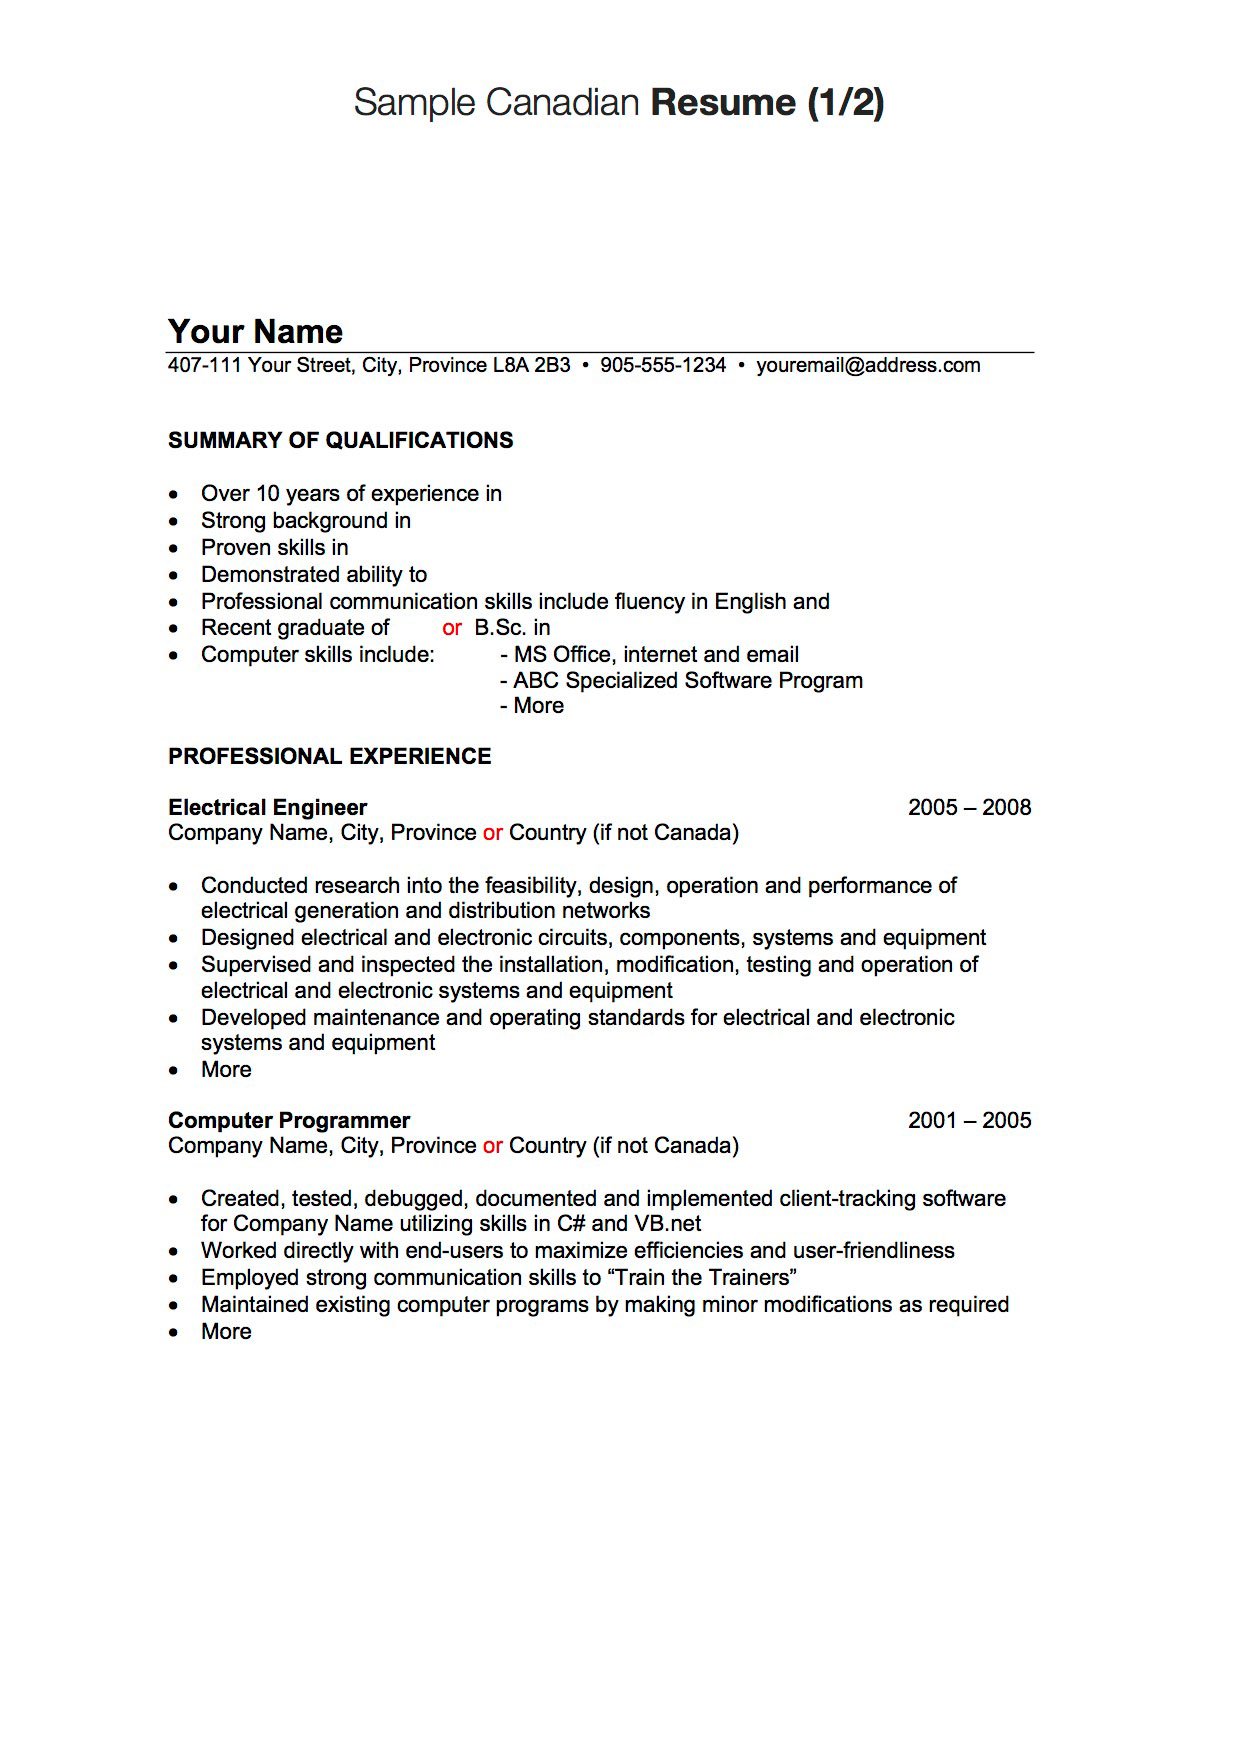 resume format for canada work permit